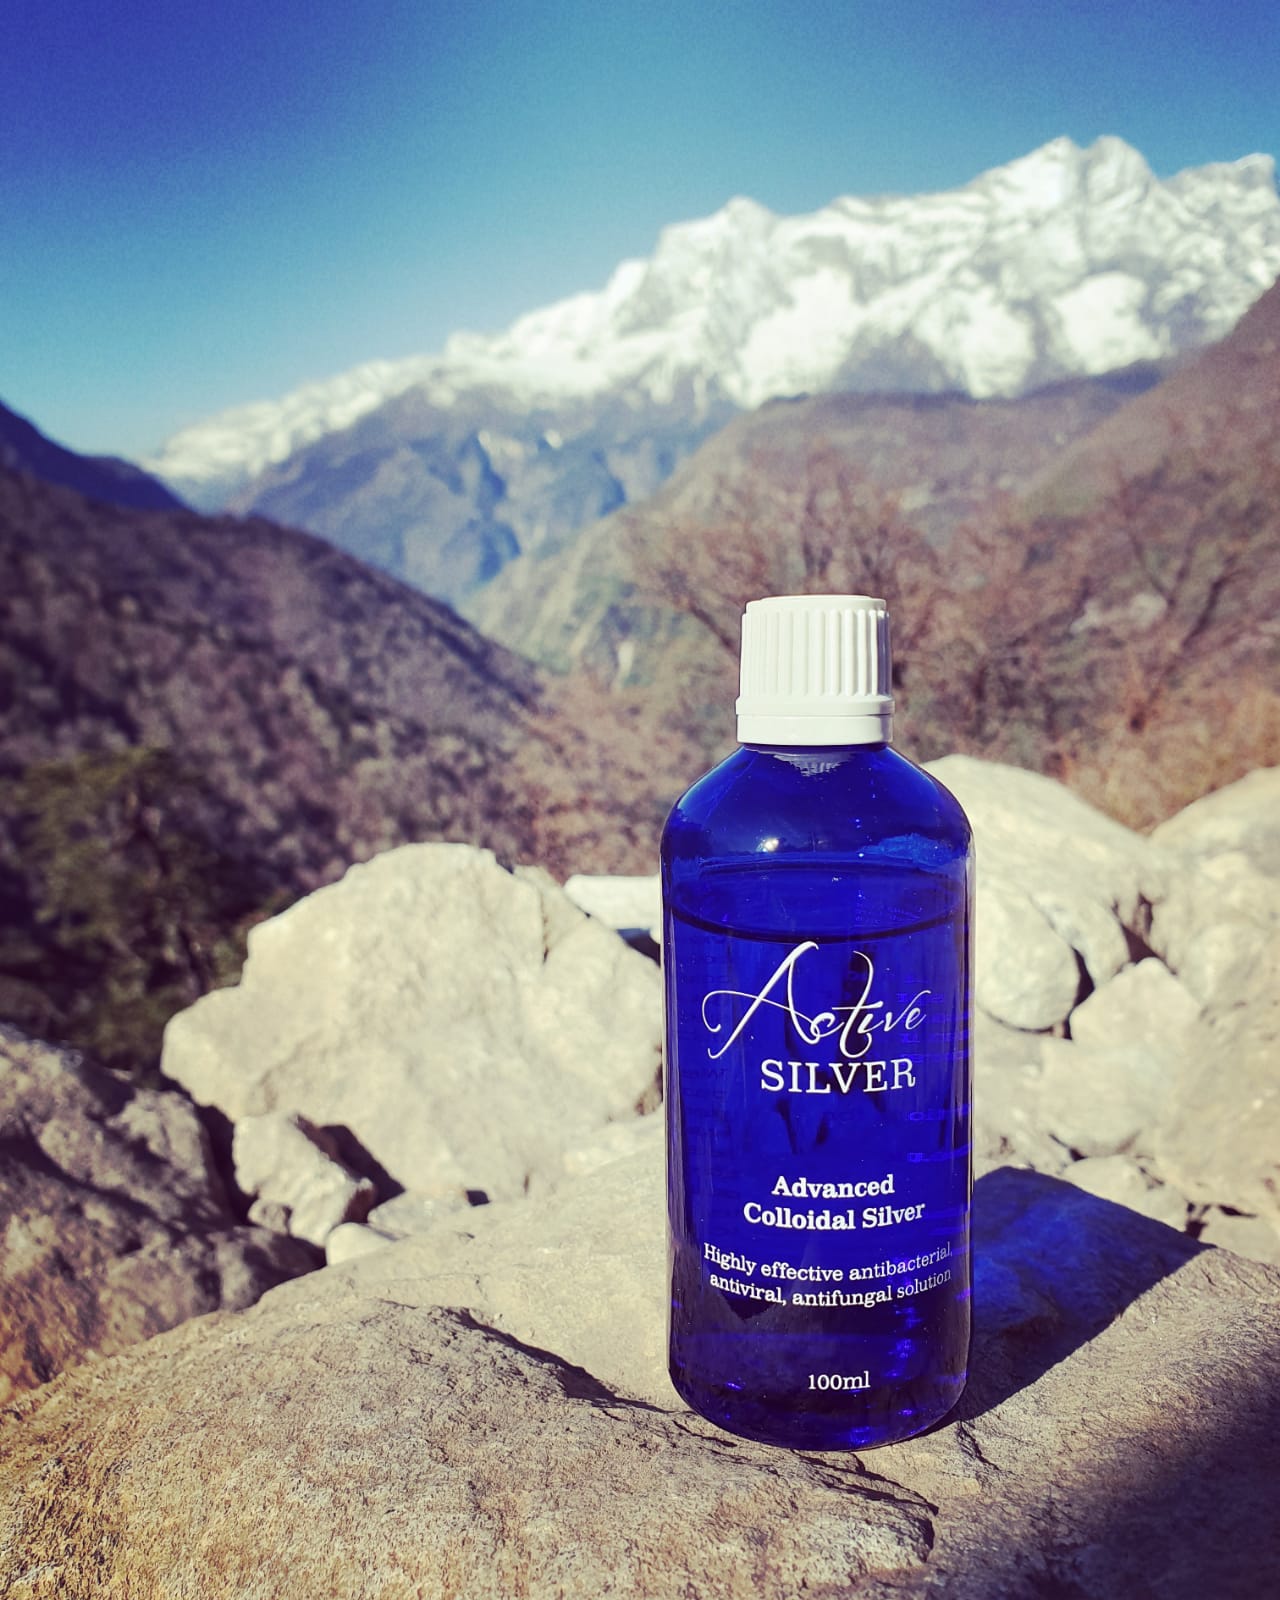 Colloidal Silver and Mount Everest